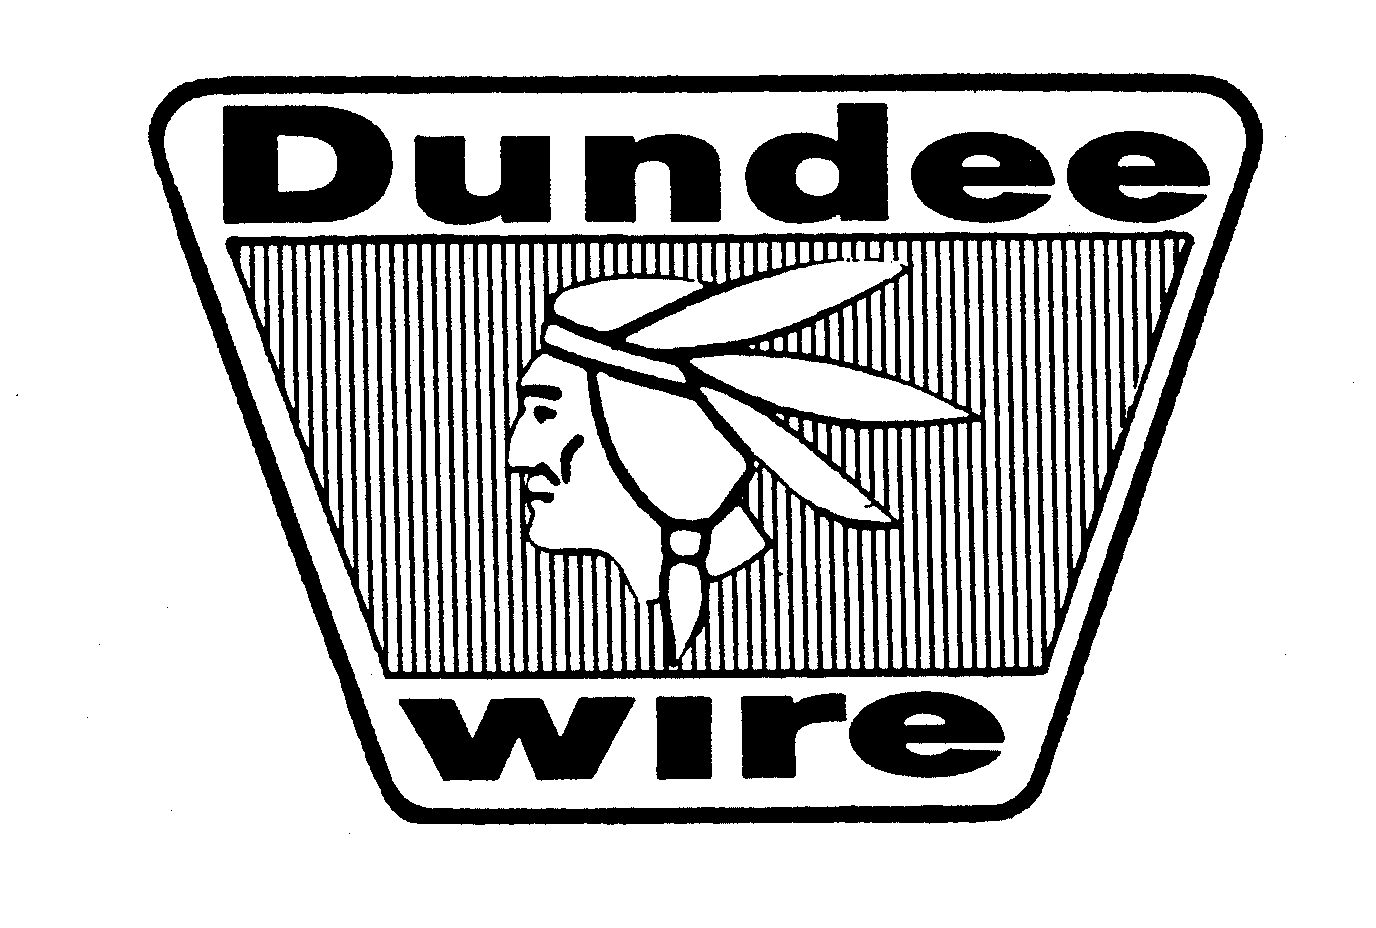  DUNDEE WIRE